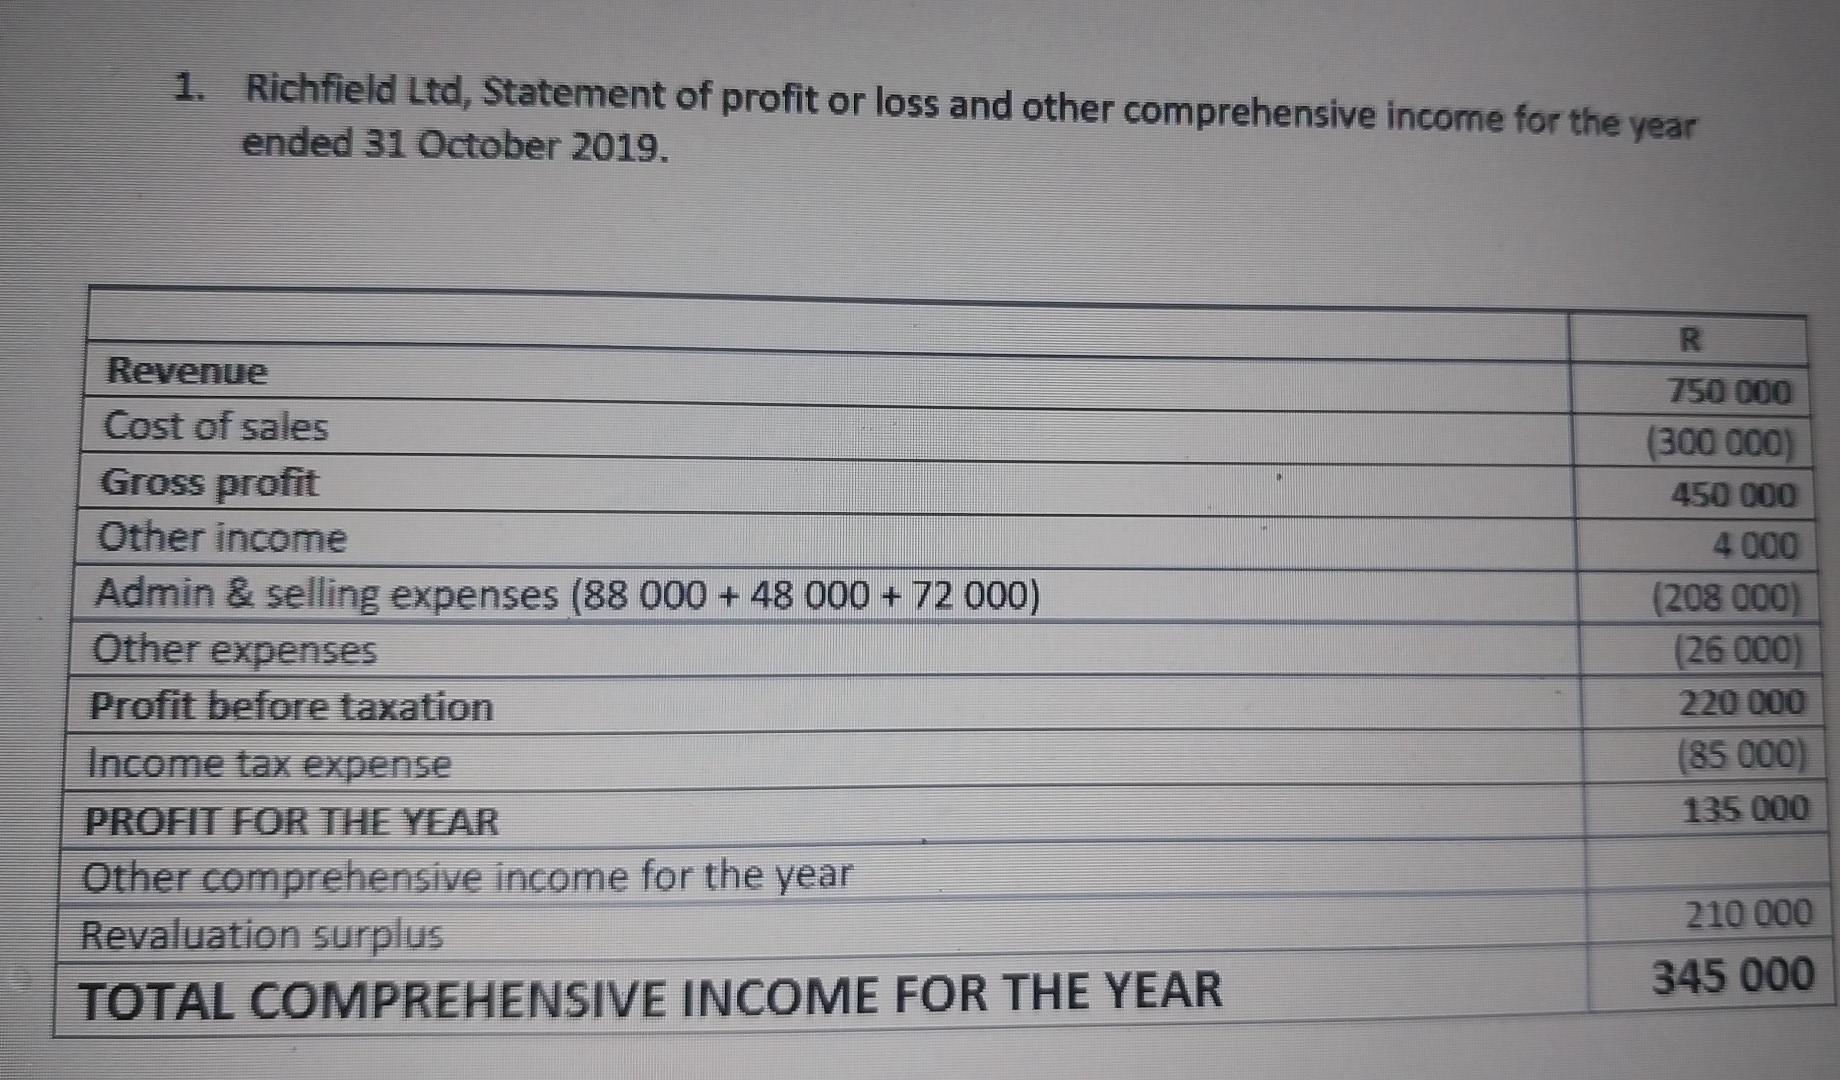 1. Richfield Ltd, Statement of profit or loss and other comprehensive income for the year ended 31 October